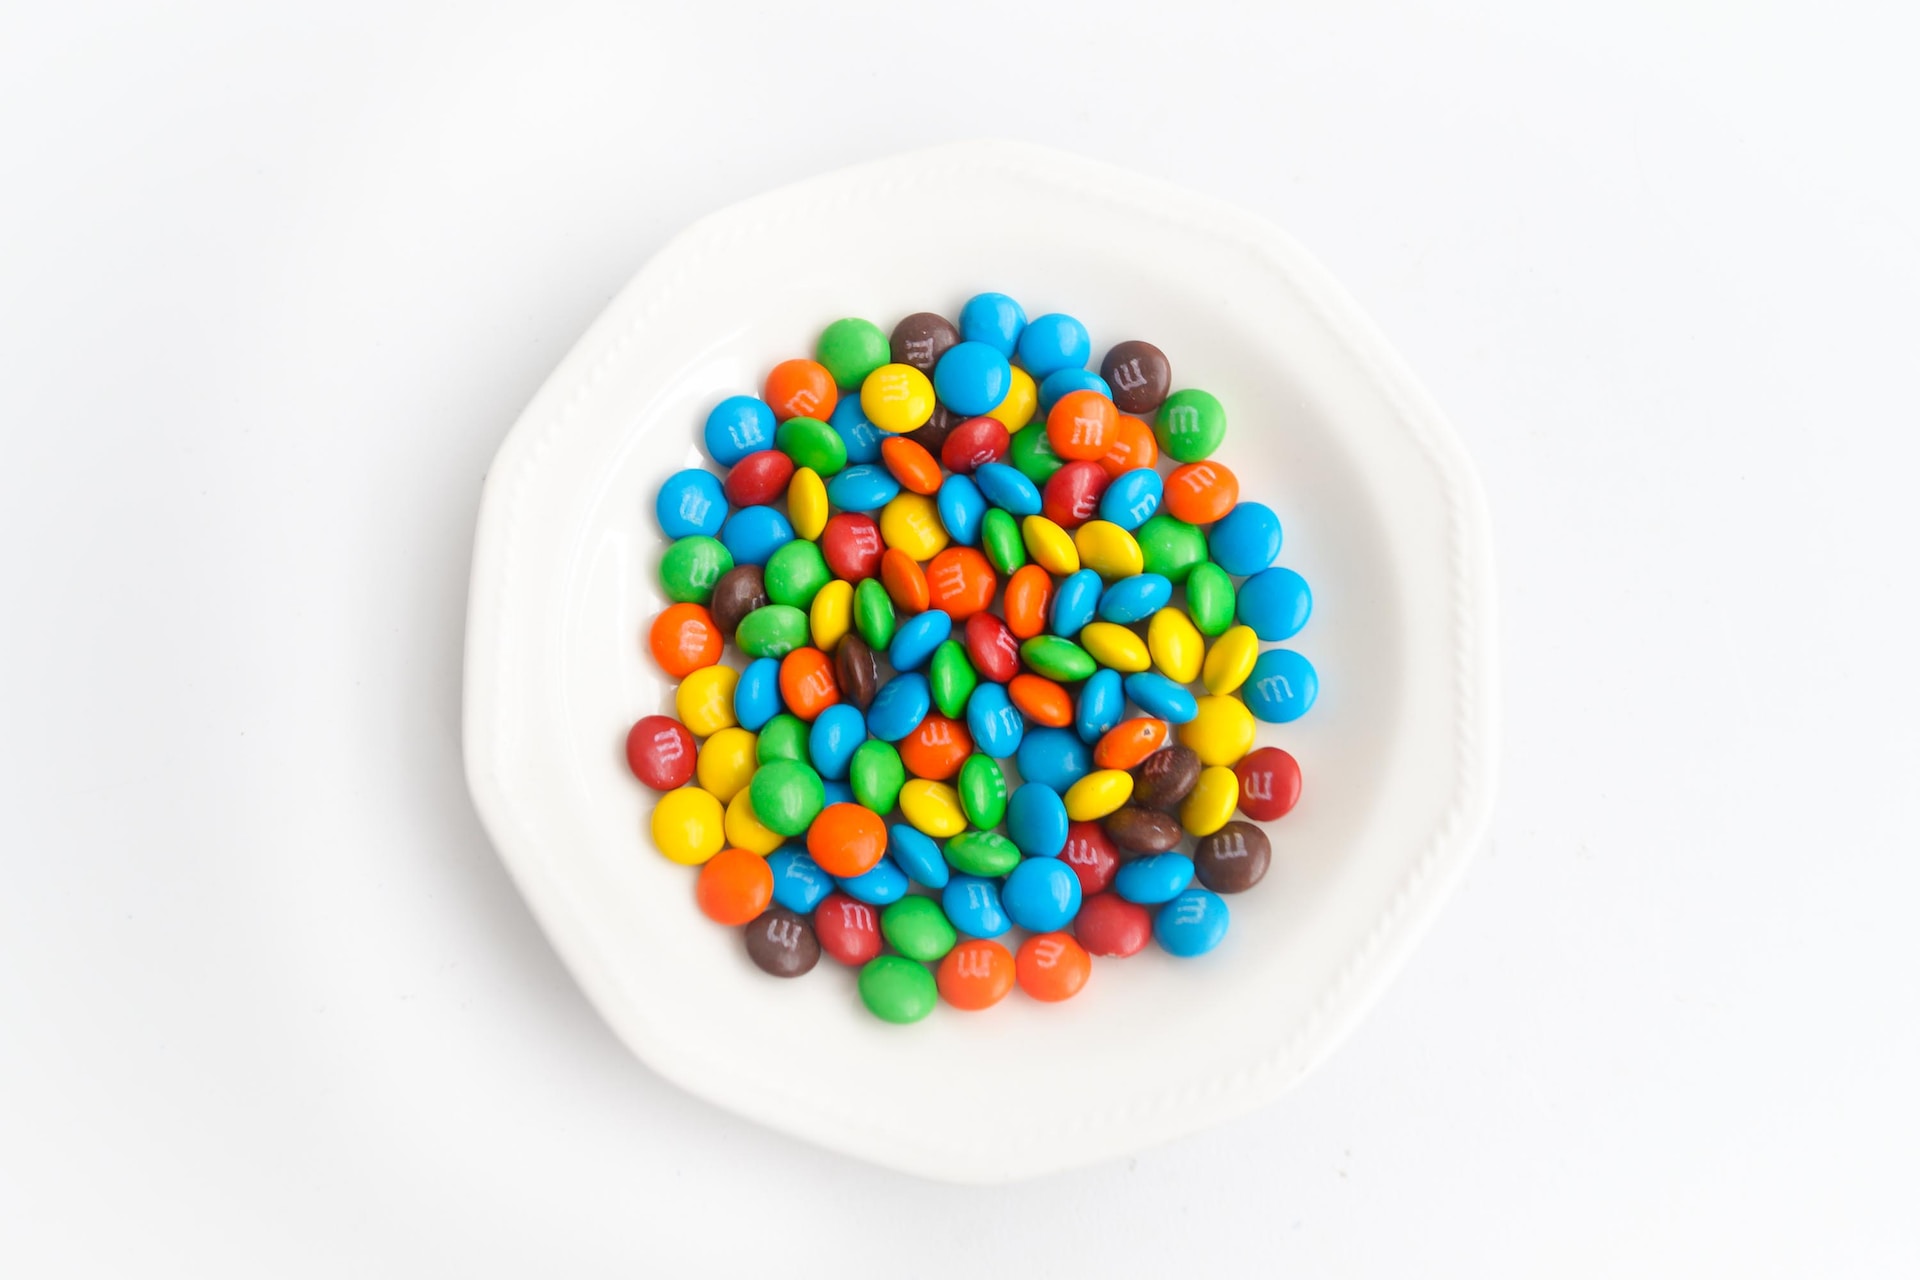 The beloved M&M candies are one of the Mars family's most famous products